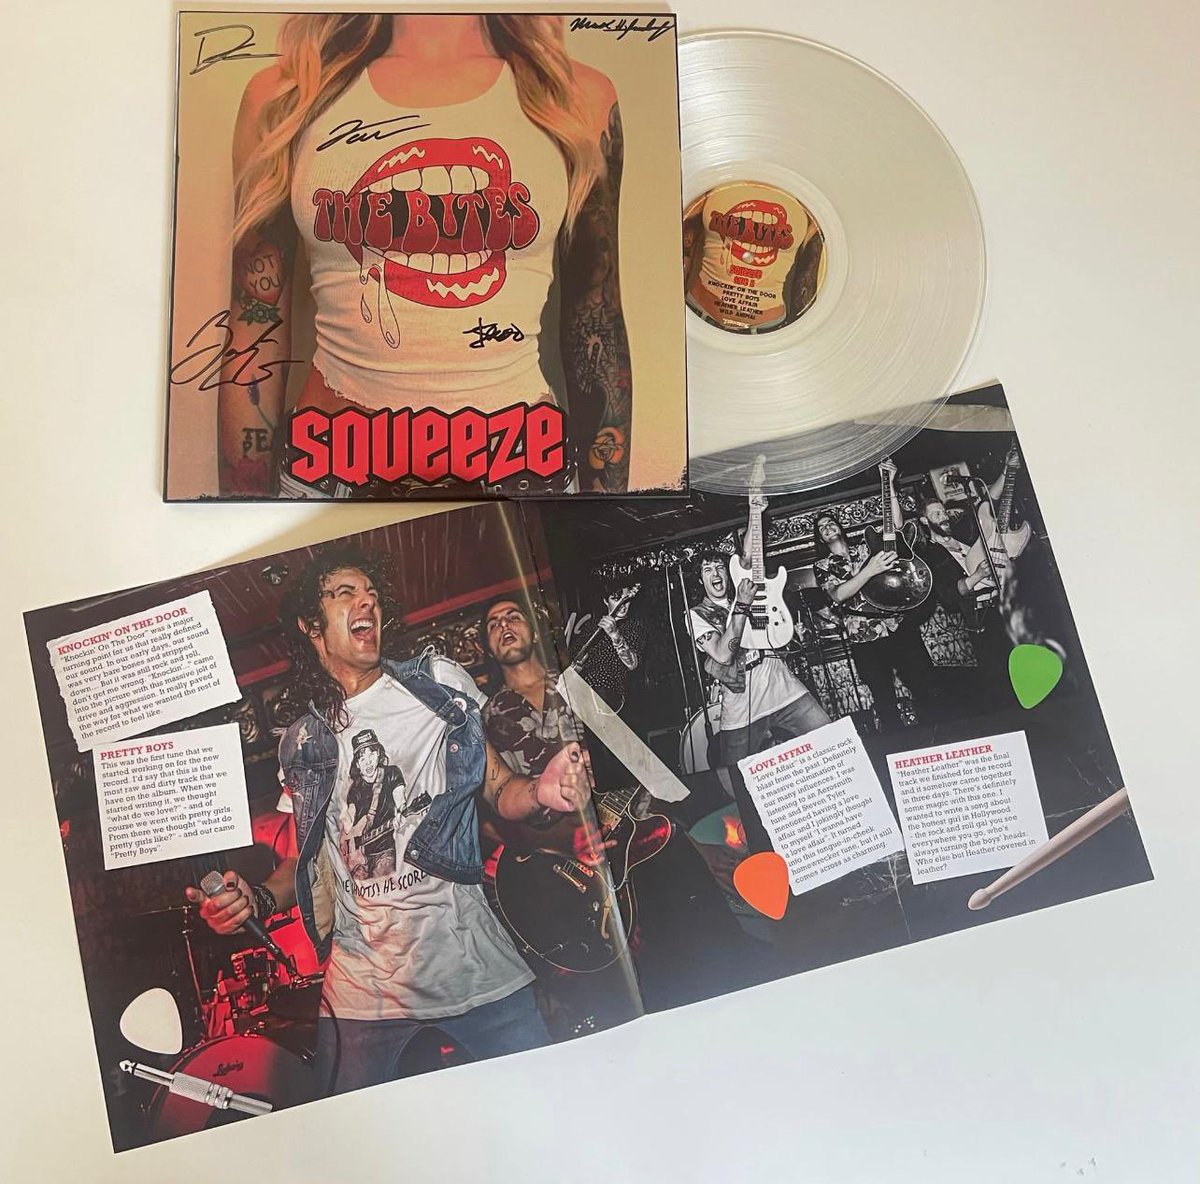 pick up your very own copy of the limited edition clear vinyl of our album SQUEEZE at earache.com/thebites